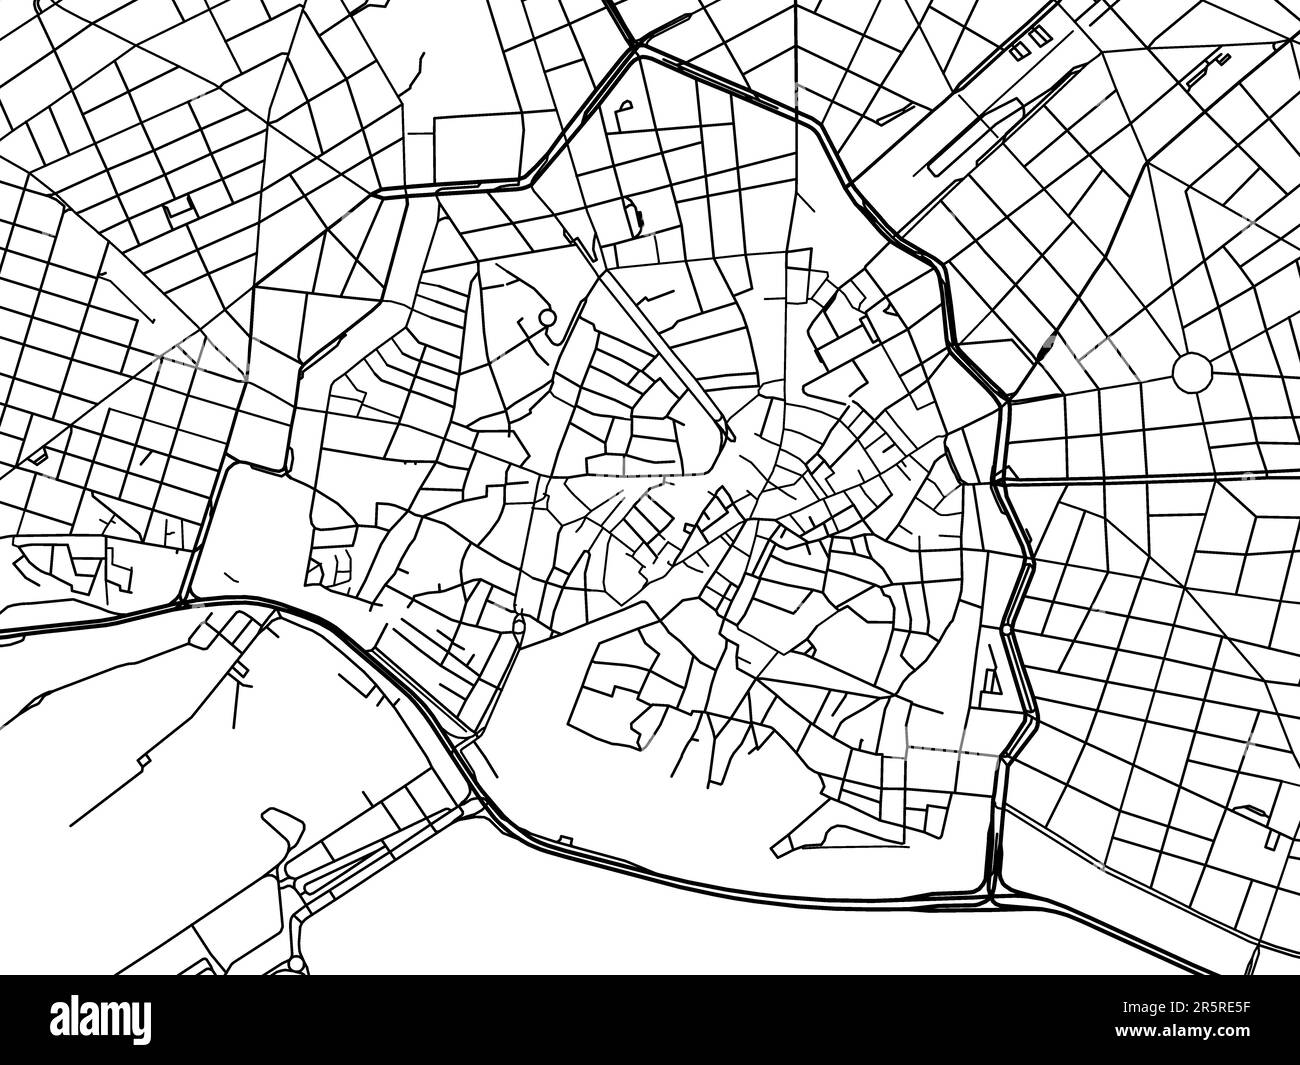 Vector road map of the city of  Palma de Mallorca Centro in Spain on a white background. Stock Photo